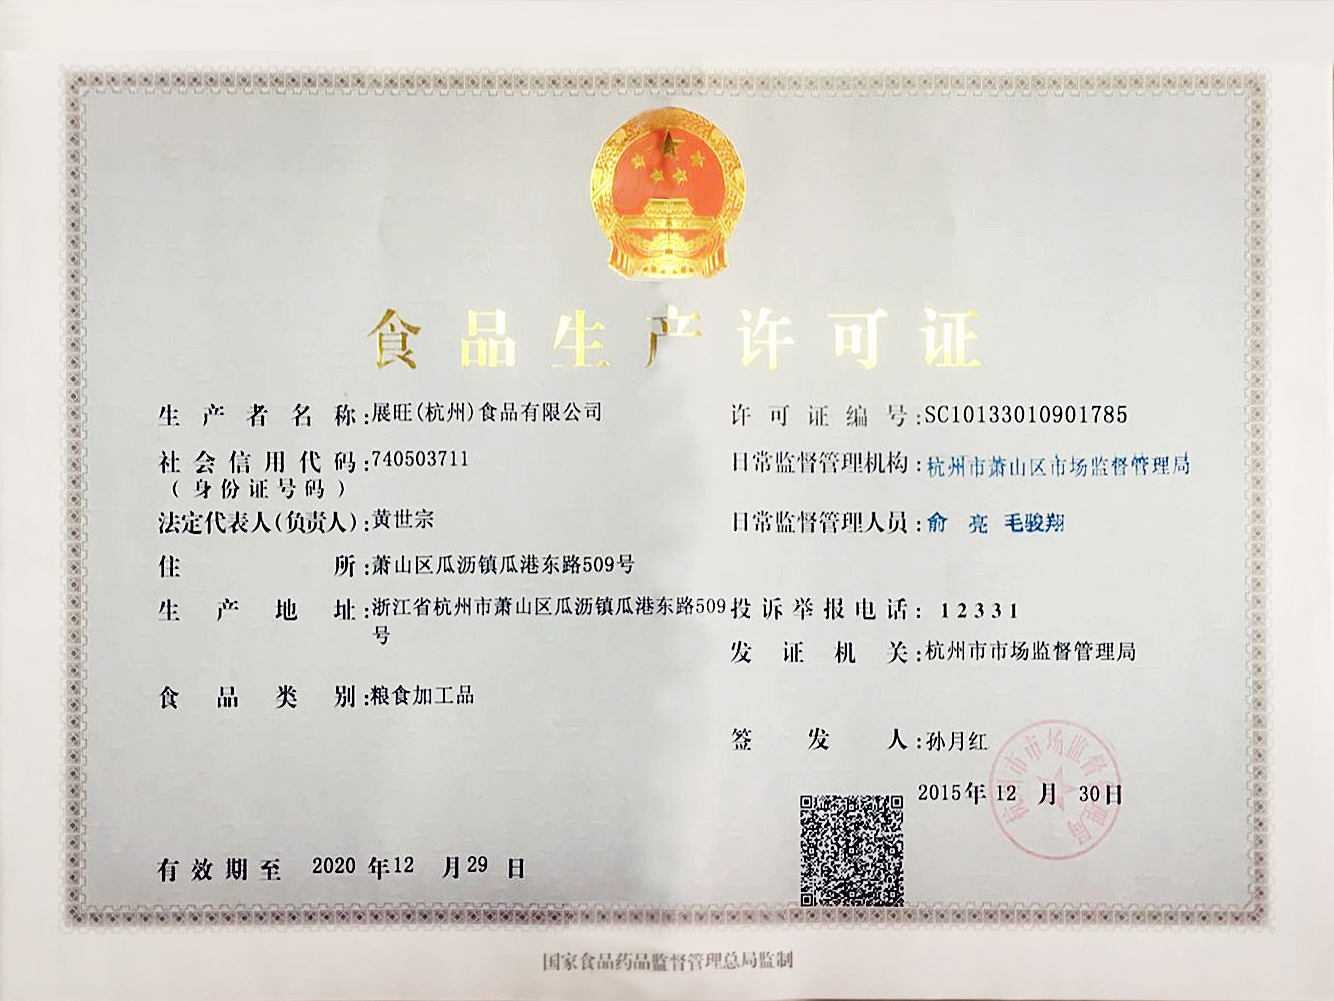 PRODUCTION LICENSE